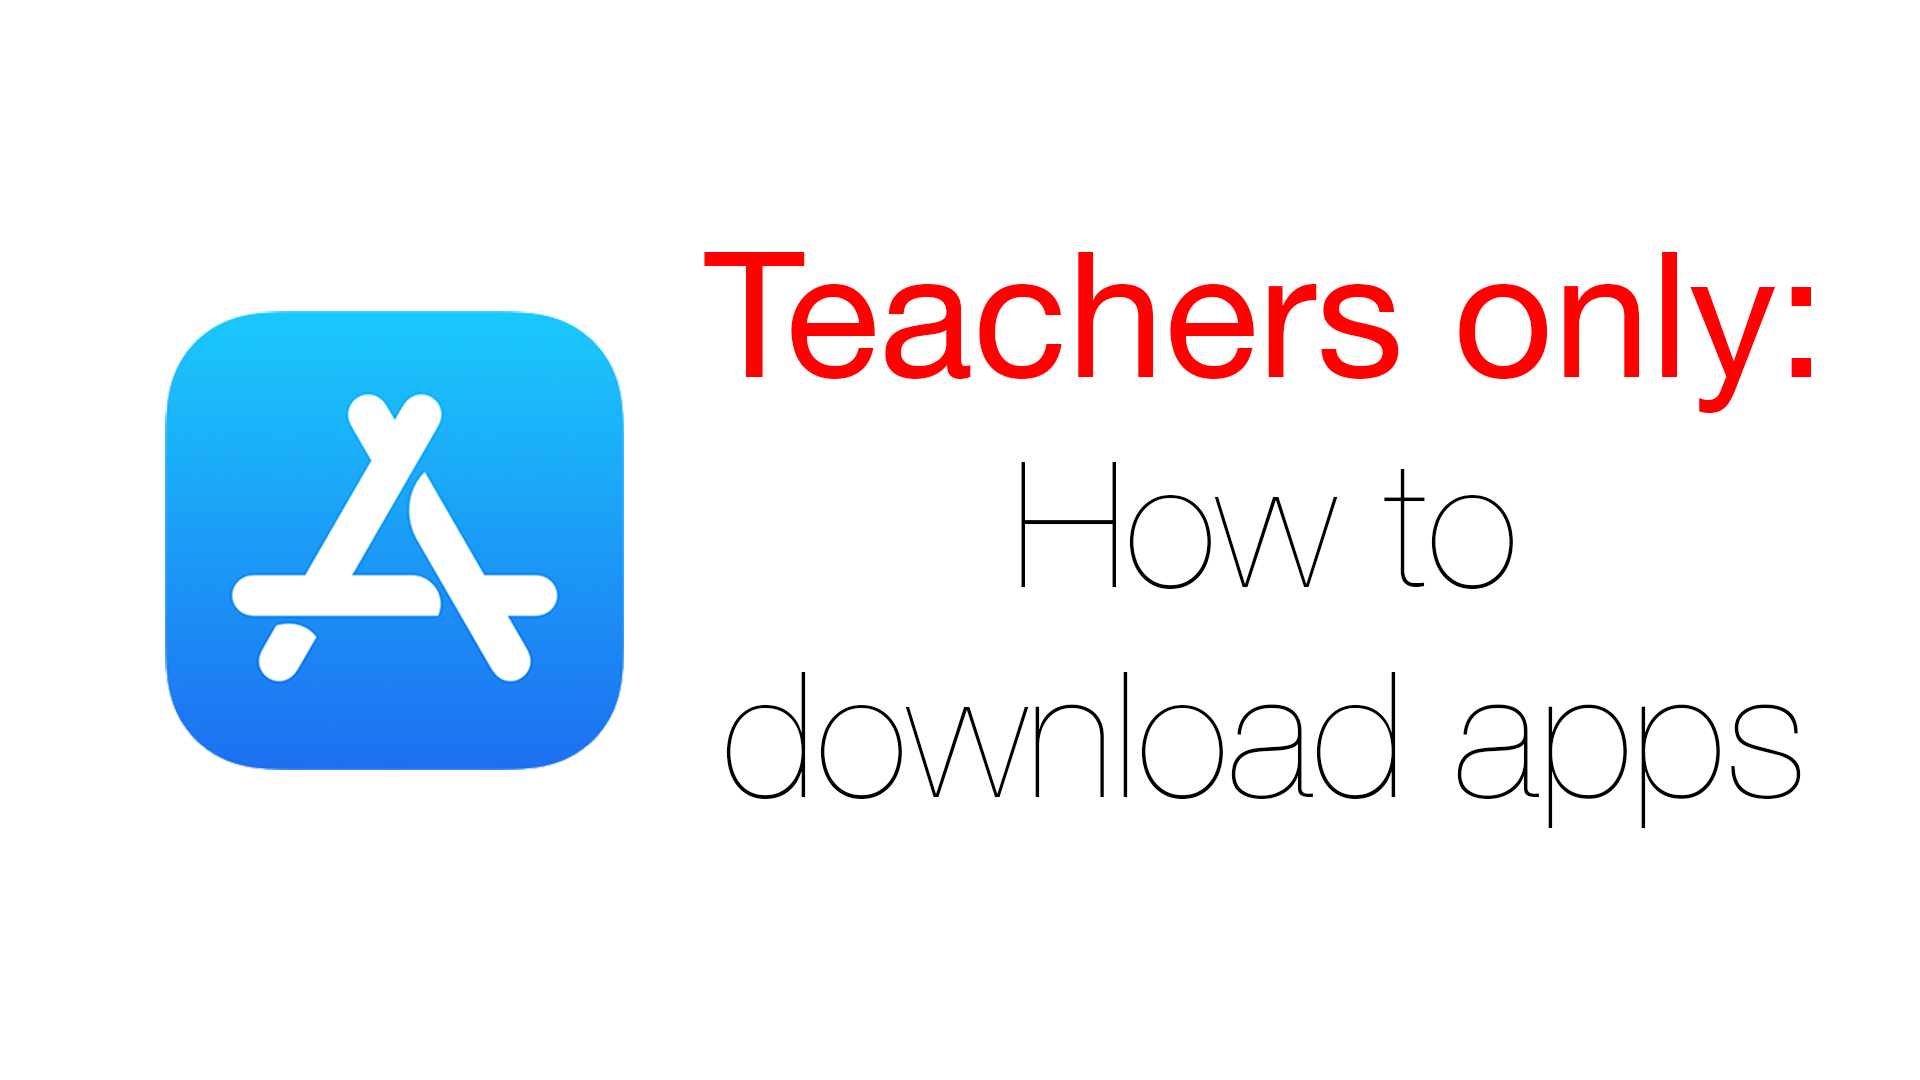 Teachers only: How to download apps